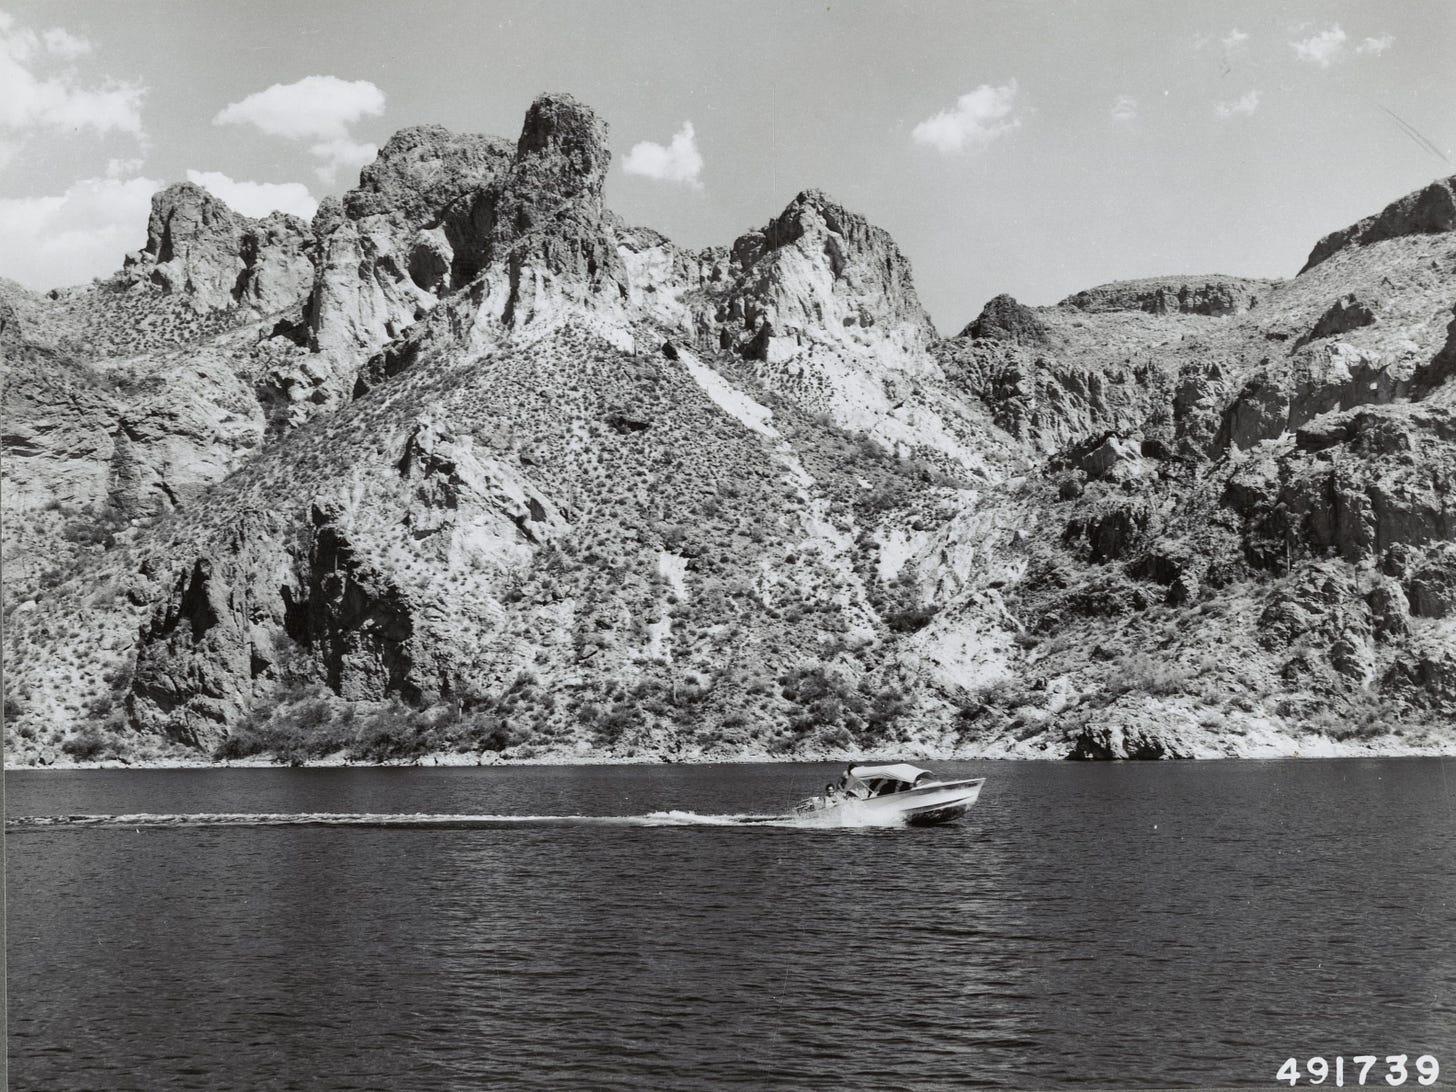 boat in a lake with rugged rocky shoreline in the background